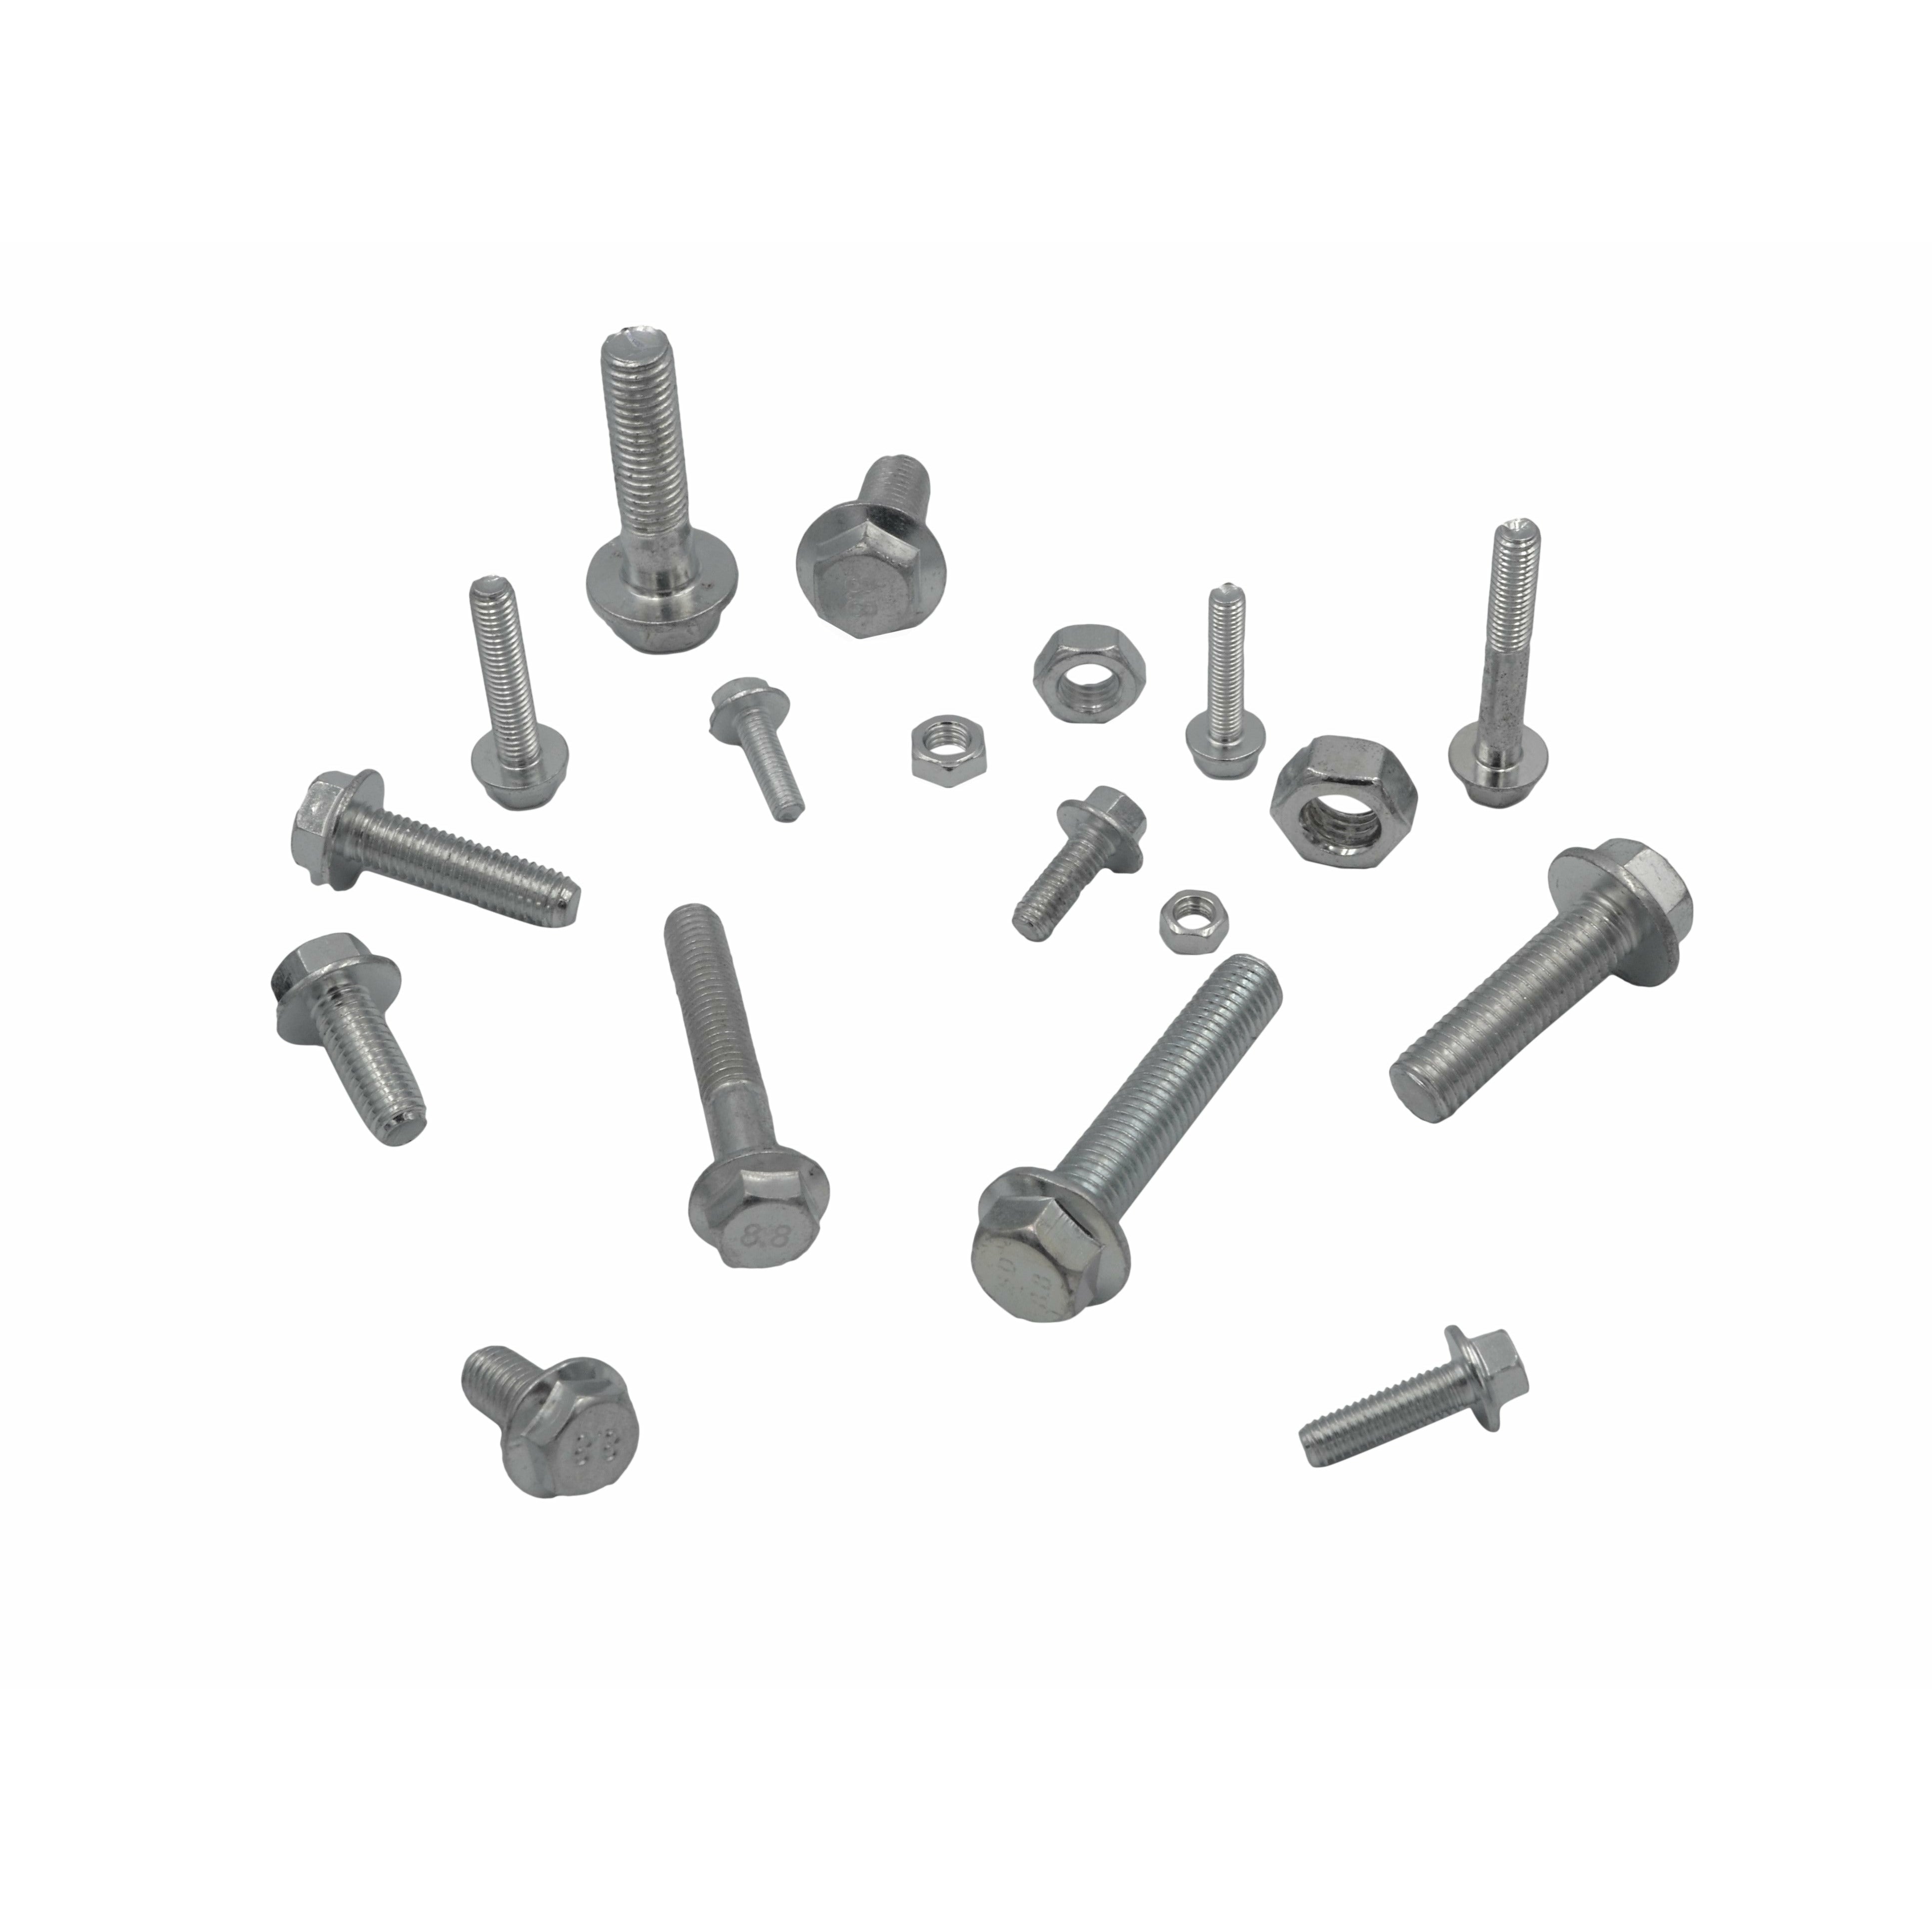 202 pc High Tensile 8.8 Flange Head Bolt and Nut Grab Kit Assortment M5 - M10